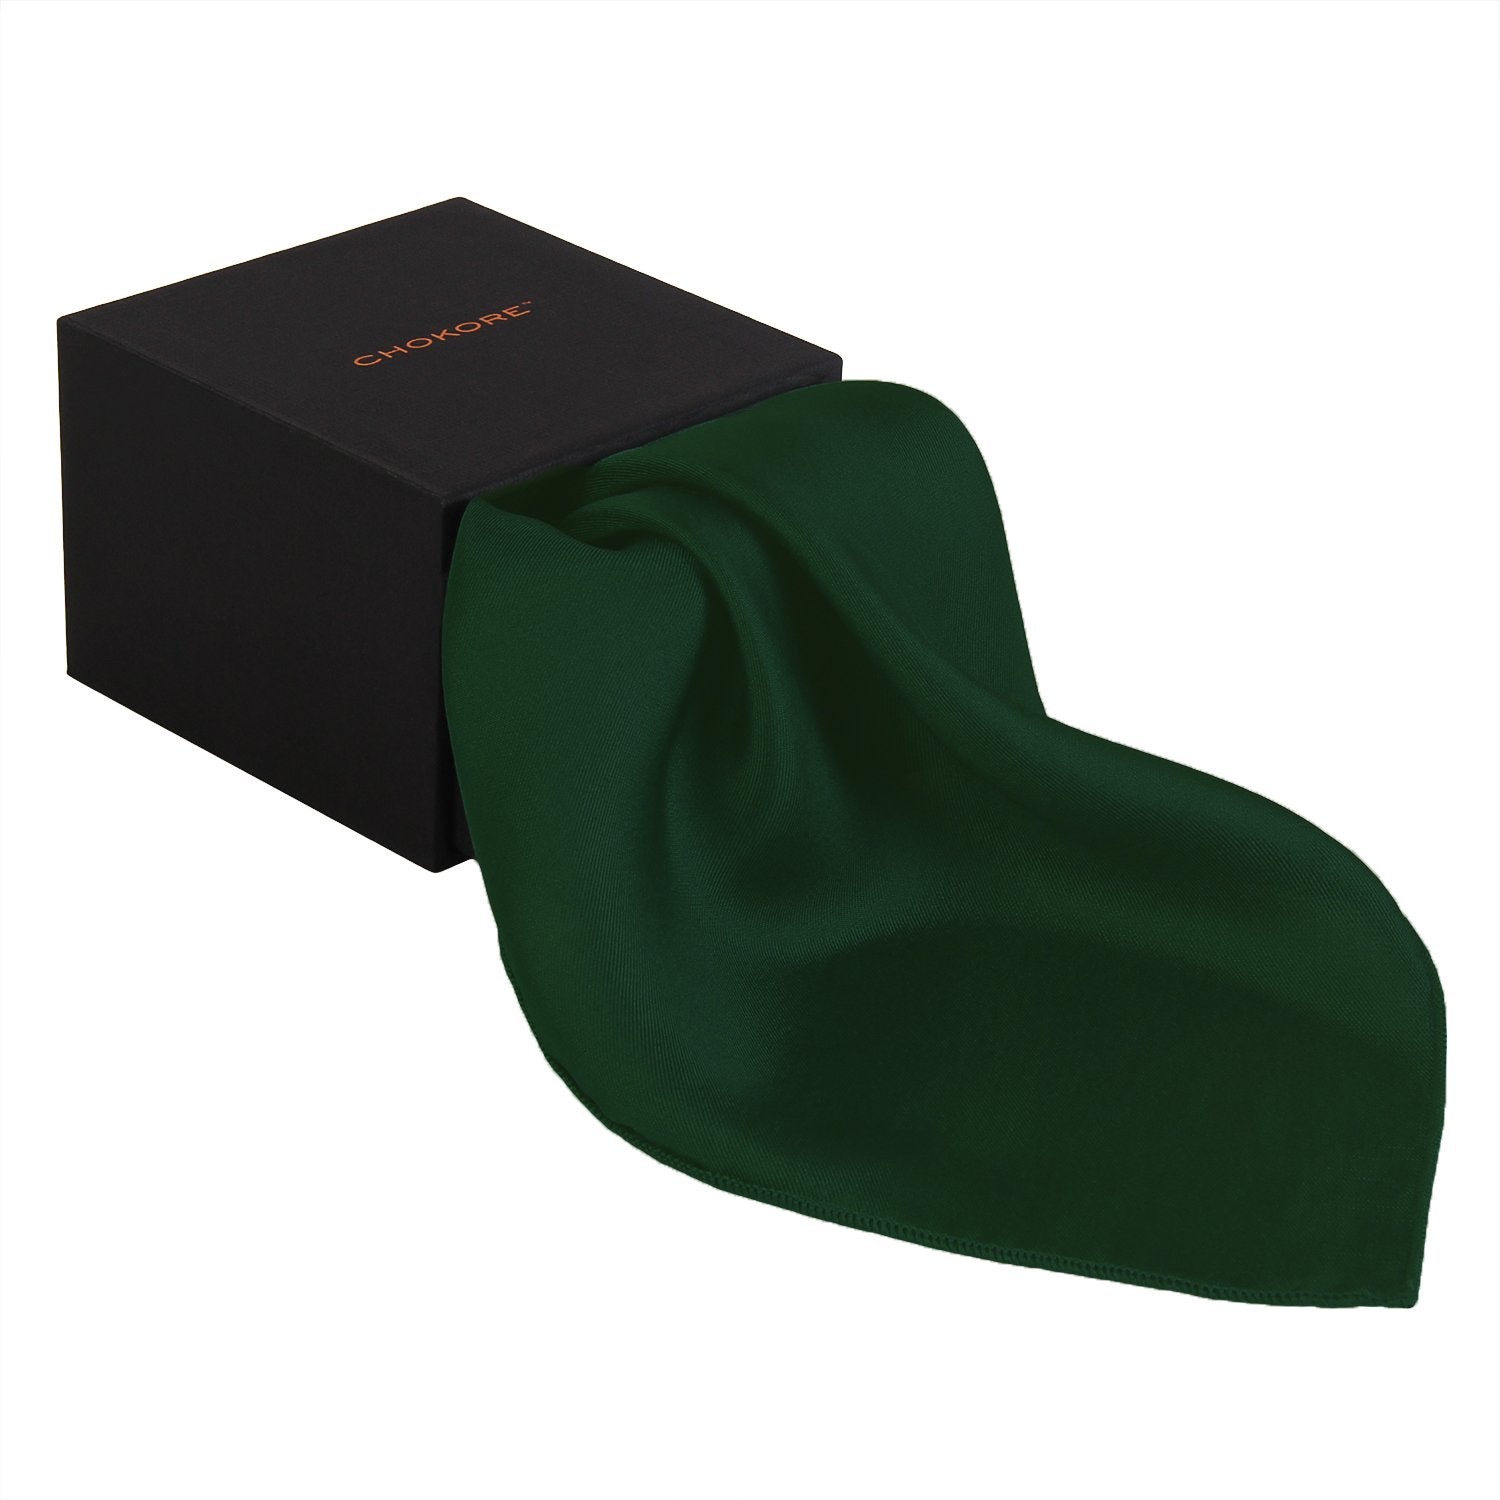 Chokore Forest Green Colour Pure Silk Pocket Square, from the Solids Line